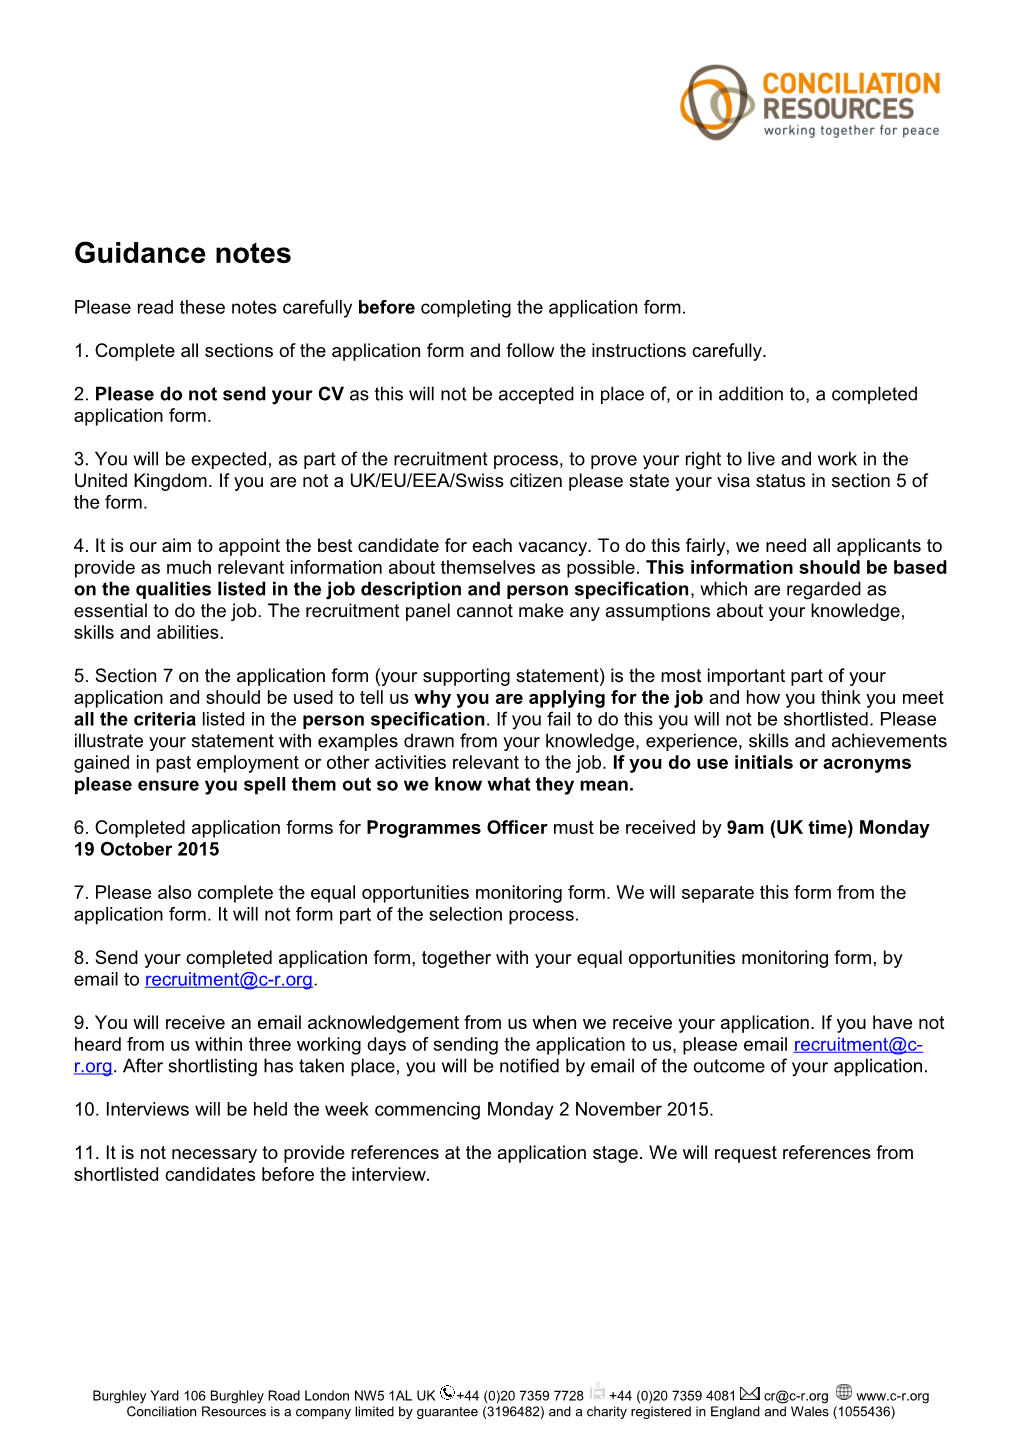 Please Read These Notes Carefully Before Completing the Application Form s2